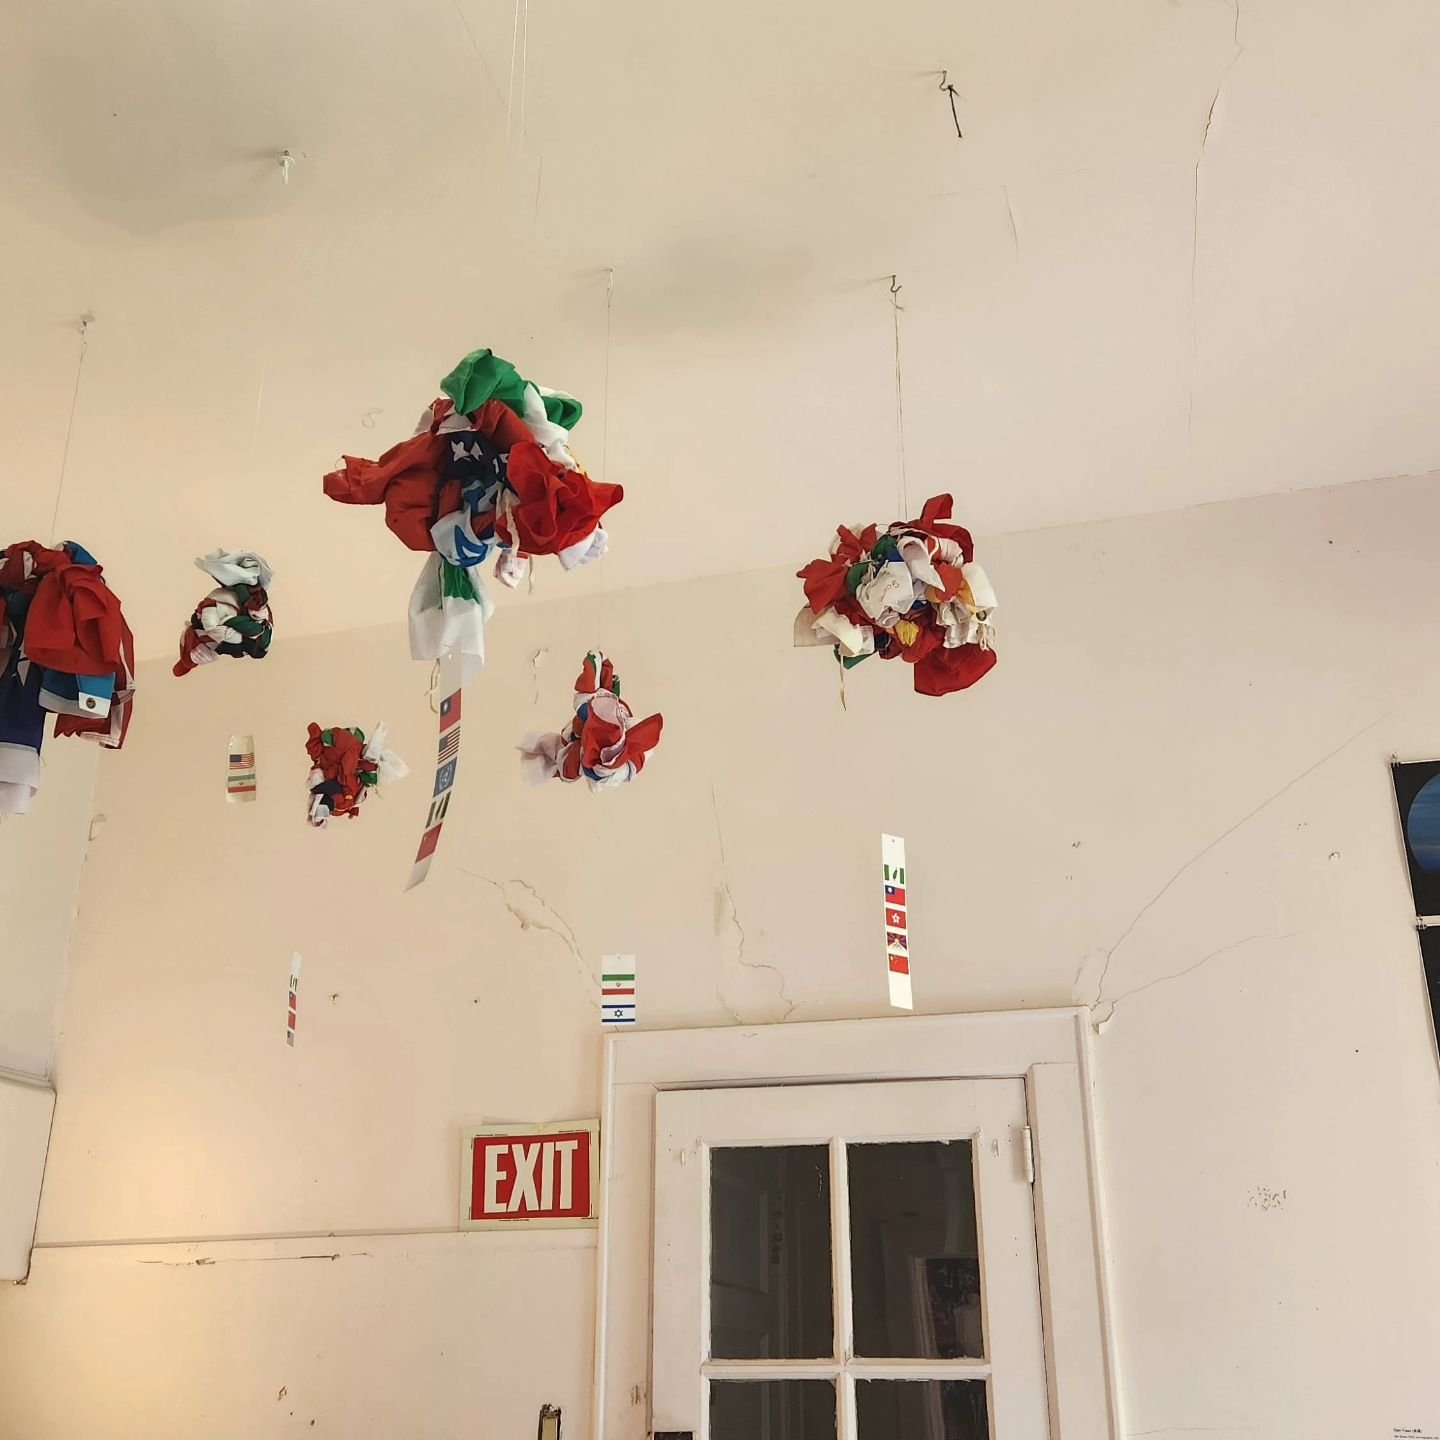 Gordian Knot installation by Taiwanese American Artist Chin-Chih Yang is now on view at TAAC House 7b, Nolan Park on Governors Island. @chinchih_yang @khll2060 @governorsisland
#GovIslandArts #TaiwaneseAmericanArtsCouncil 

Reference :
Gordian knot,&